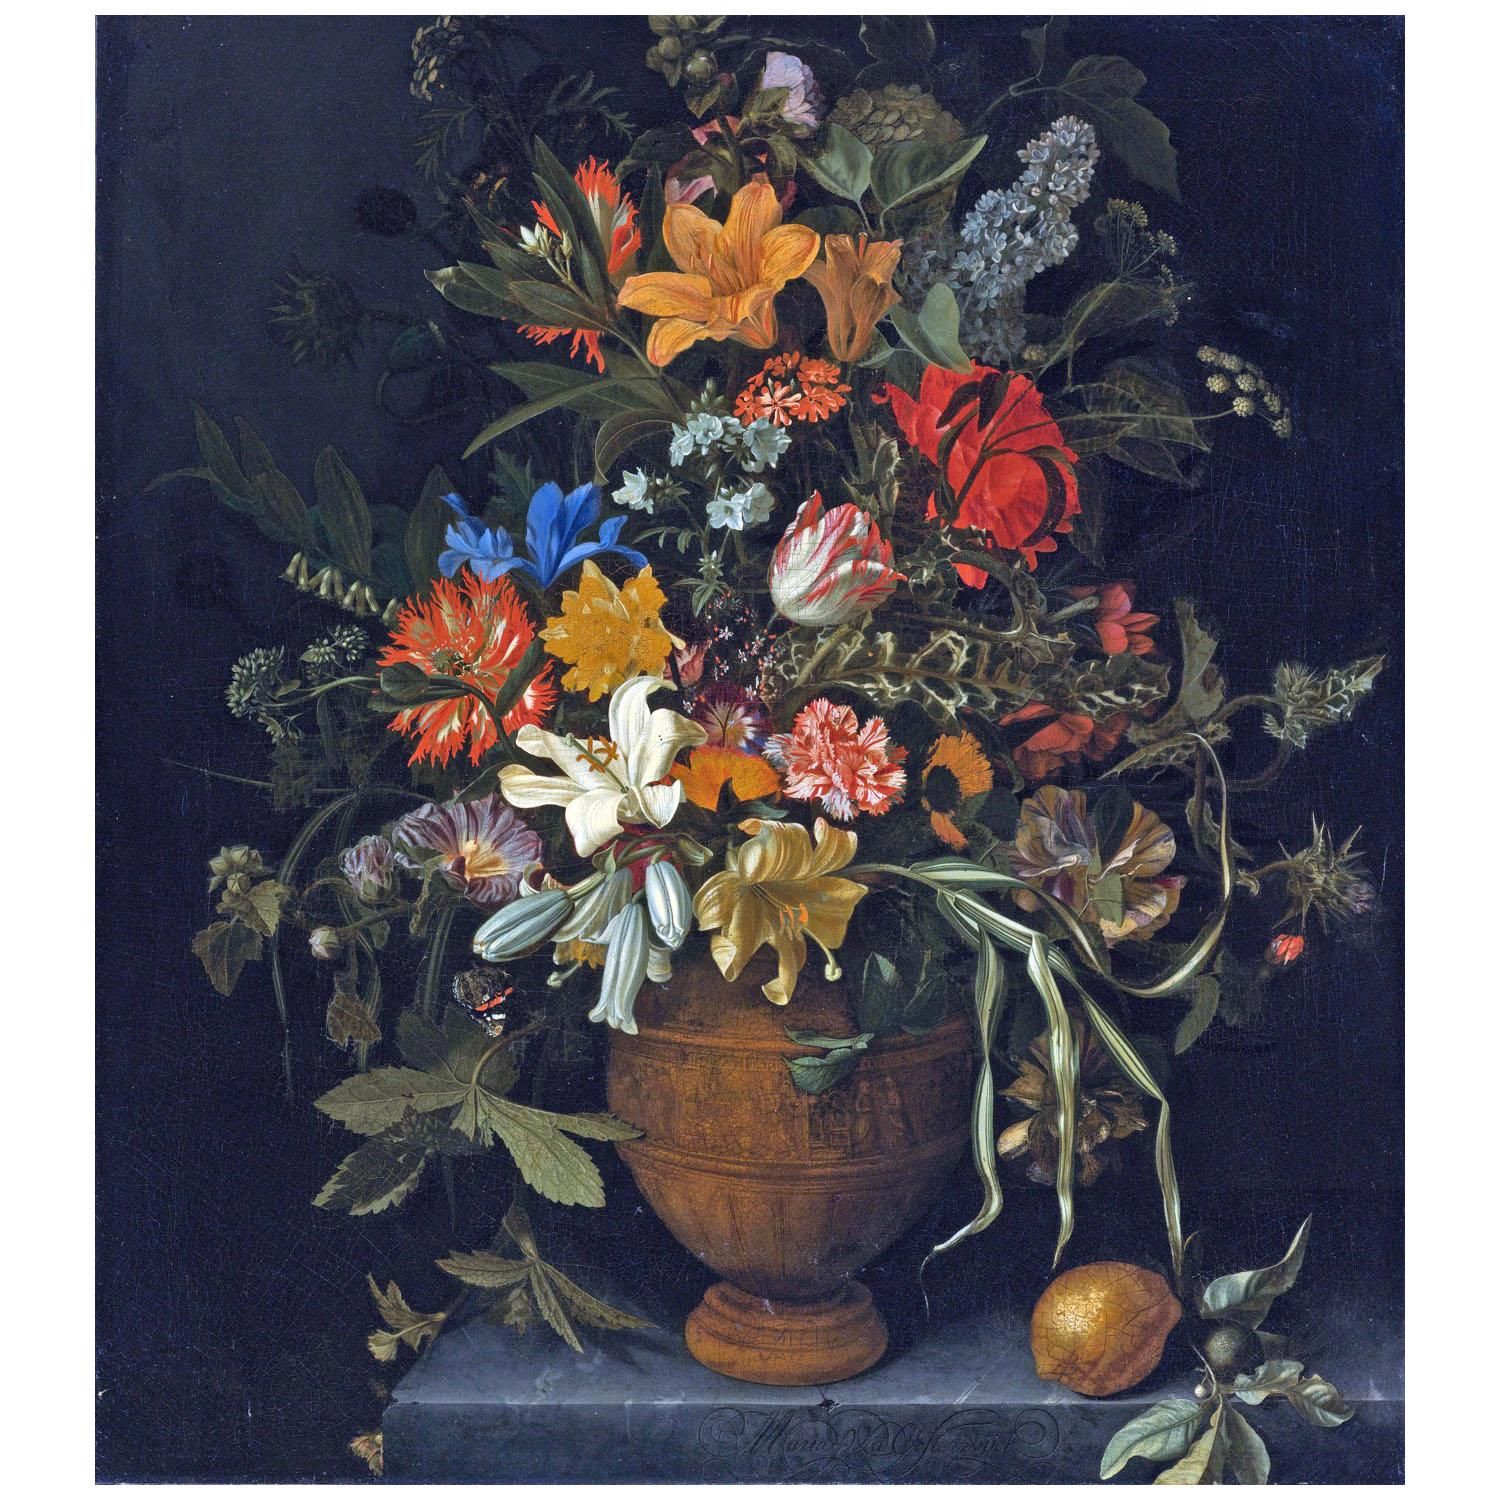 Maria van Oosterwijck. A Floral Still Life. 1675. Private collection